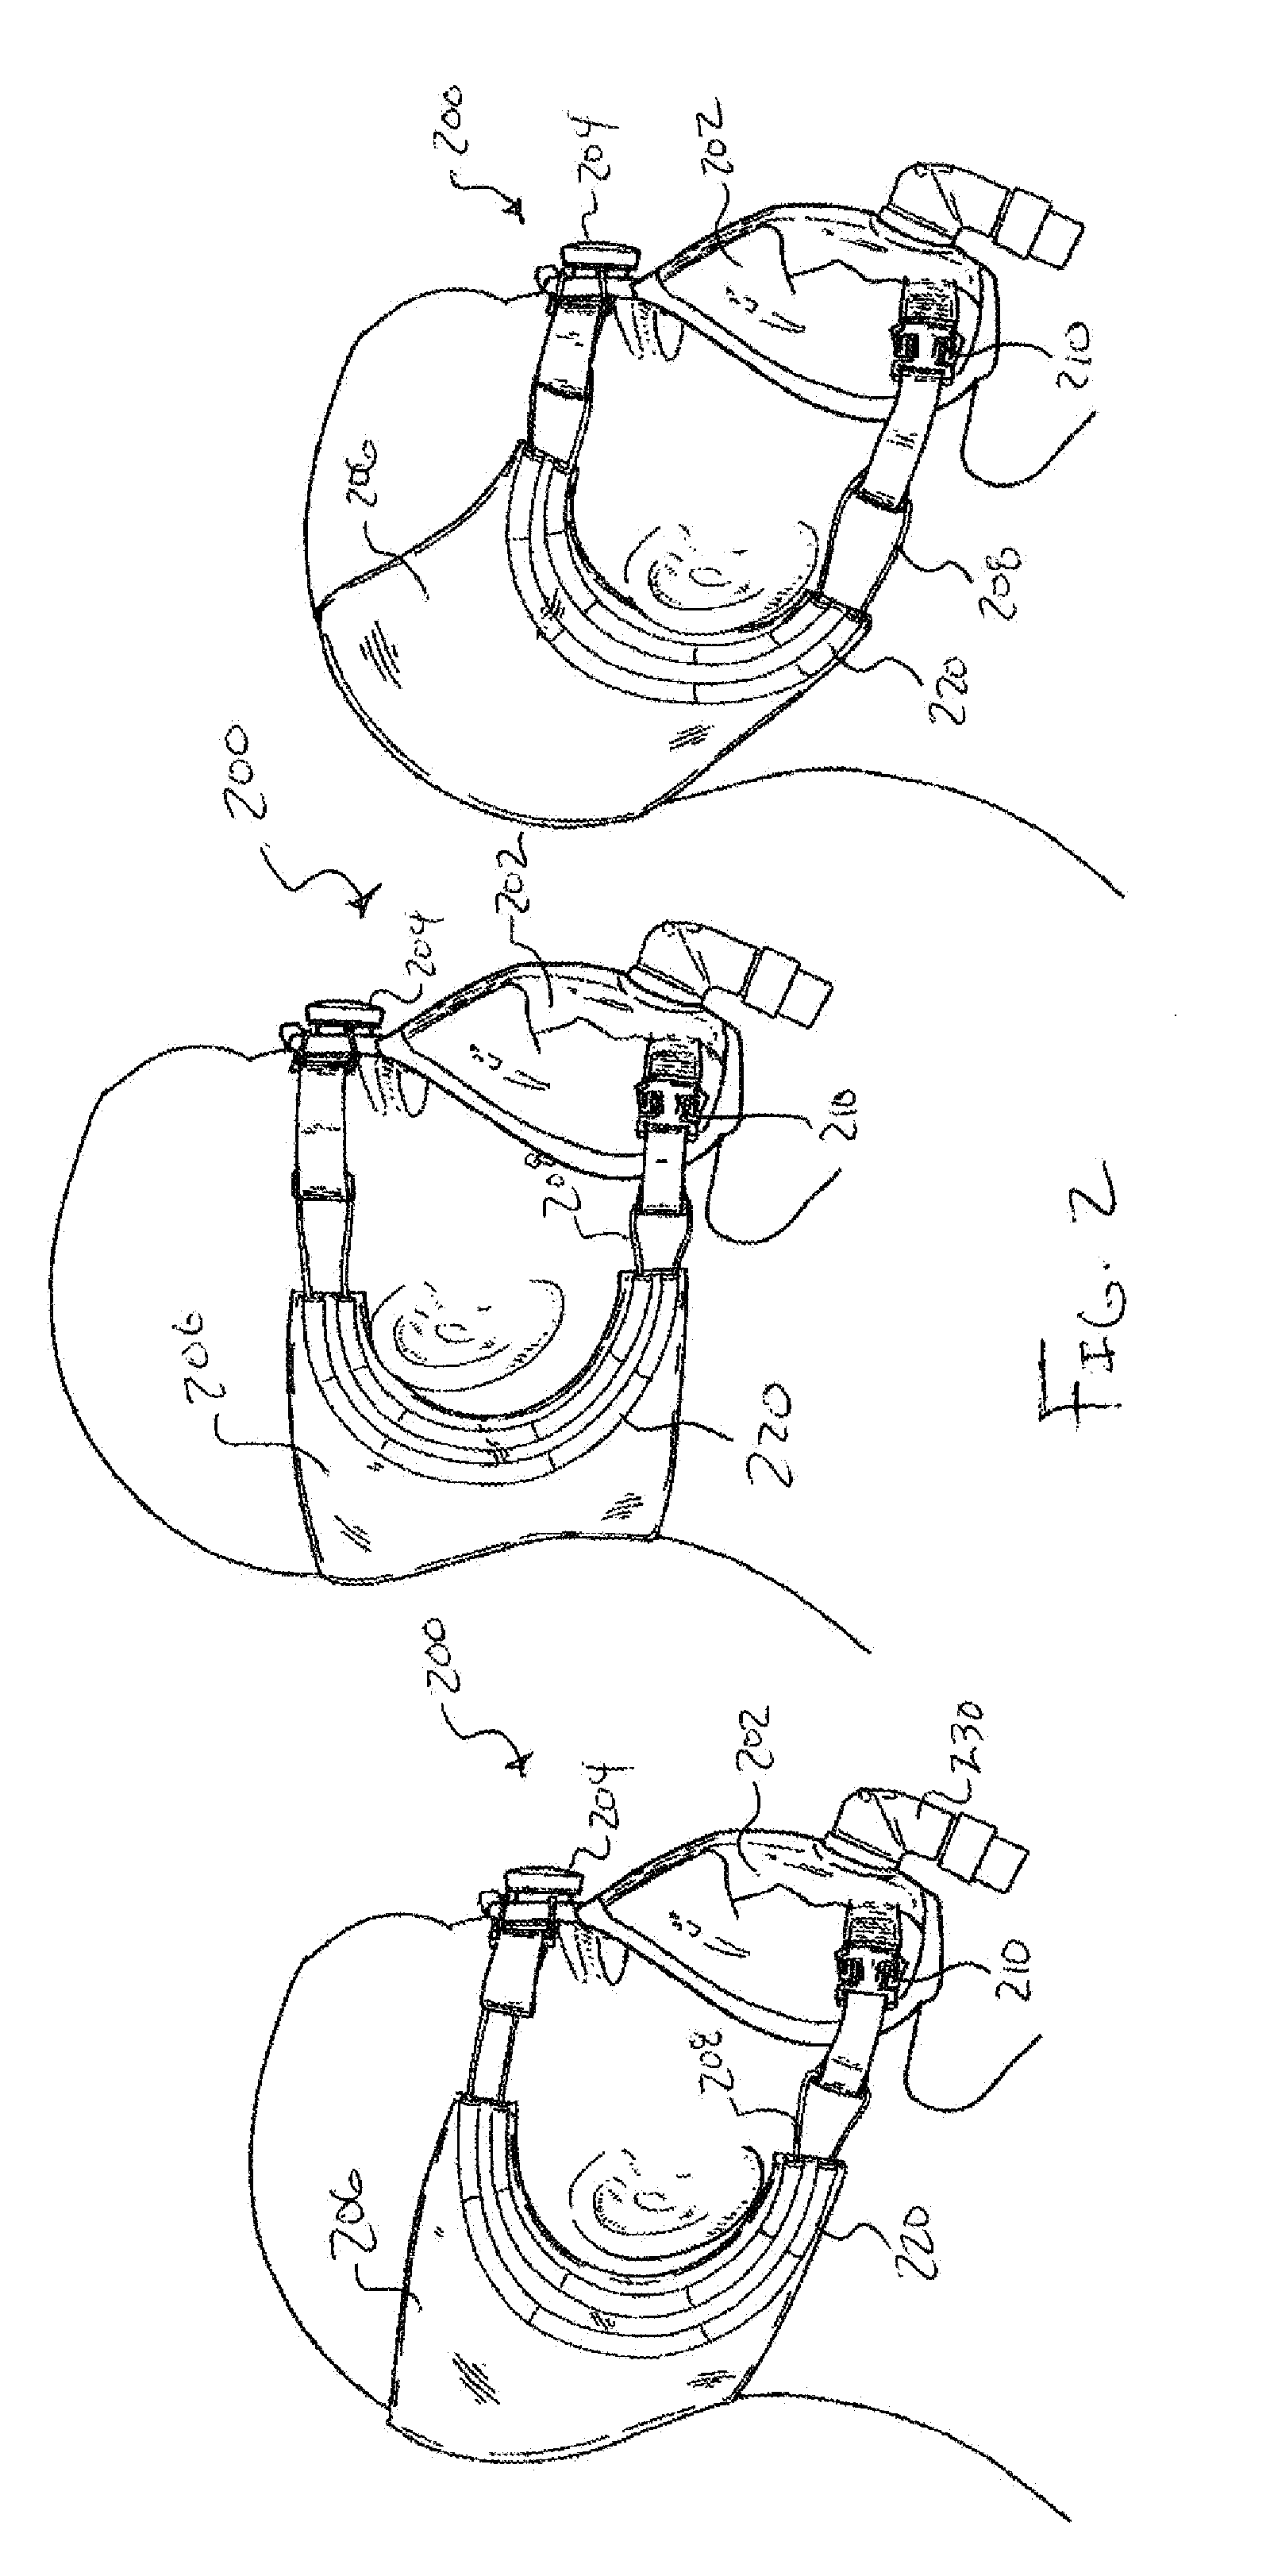 Closure methods and devices for head restraints and masks